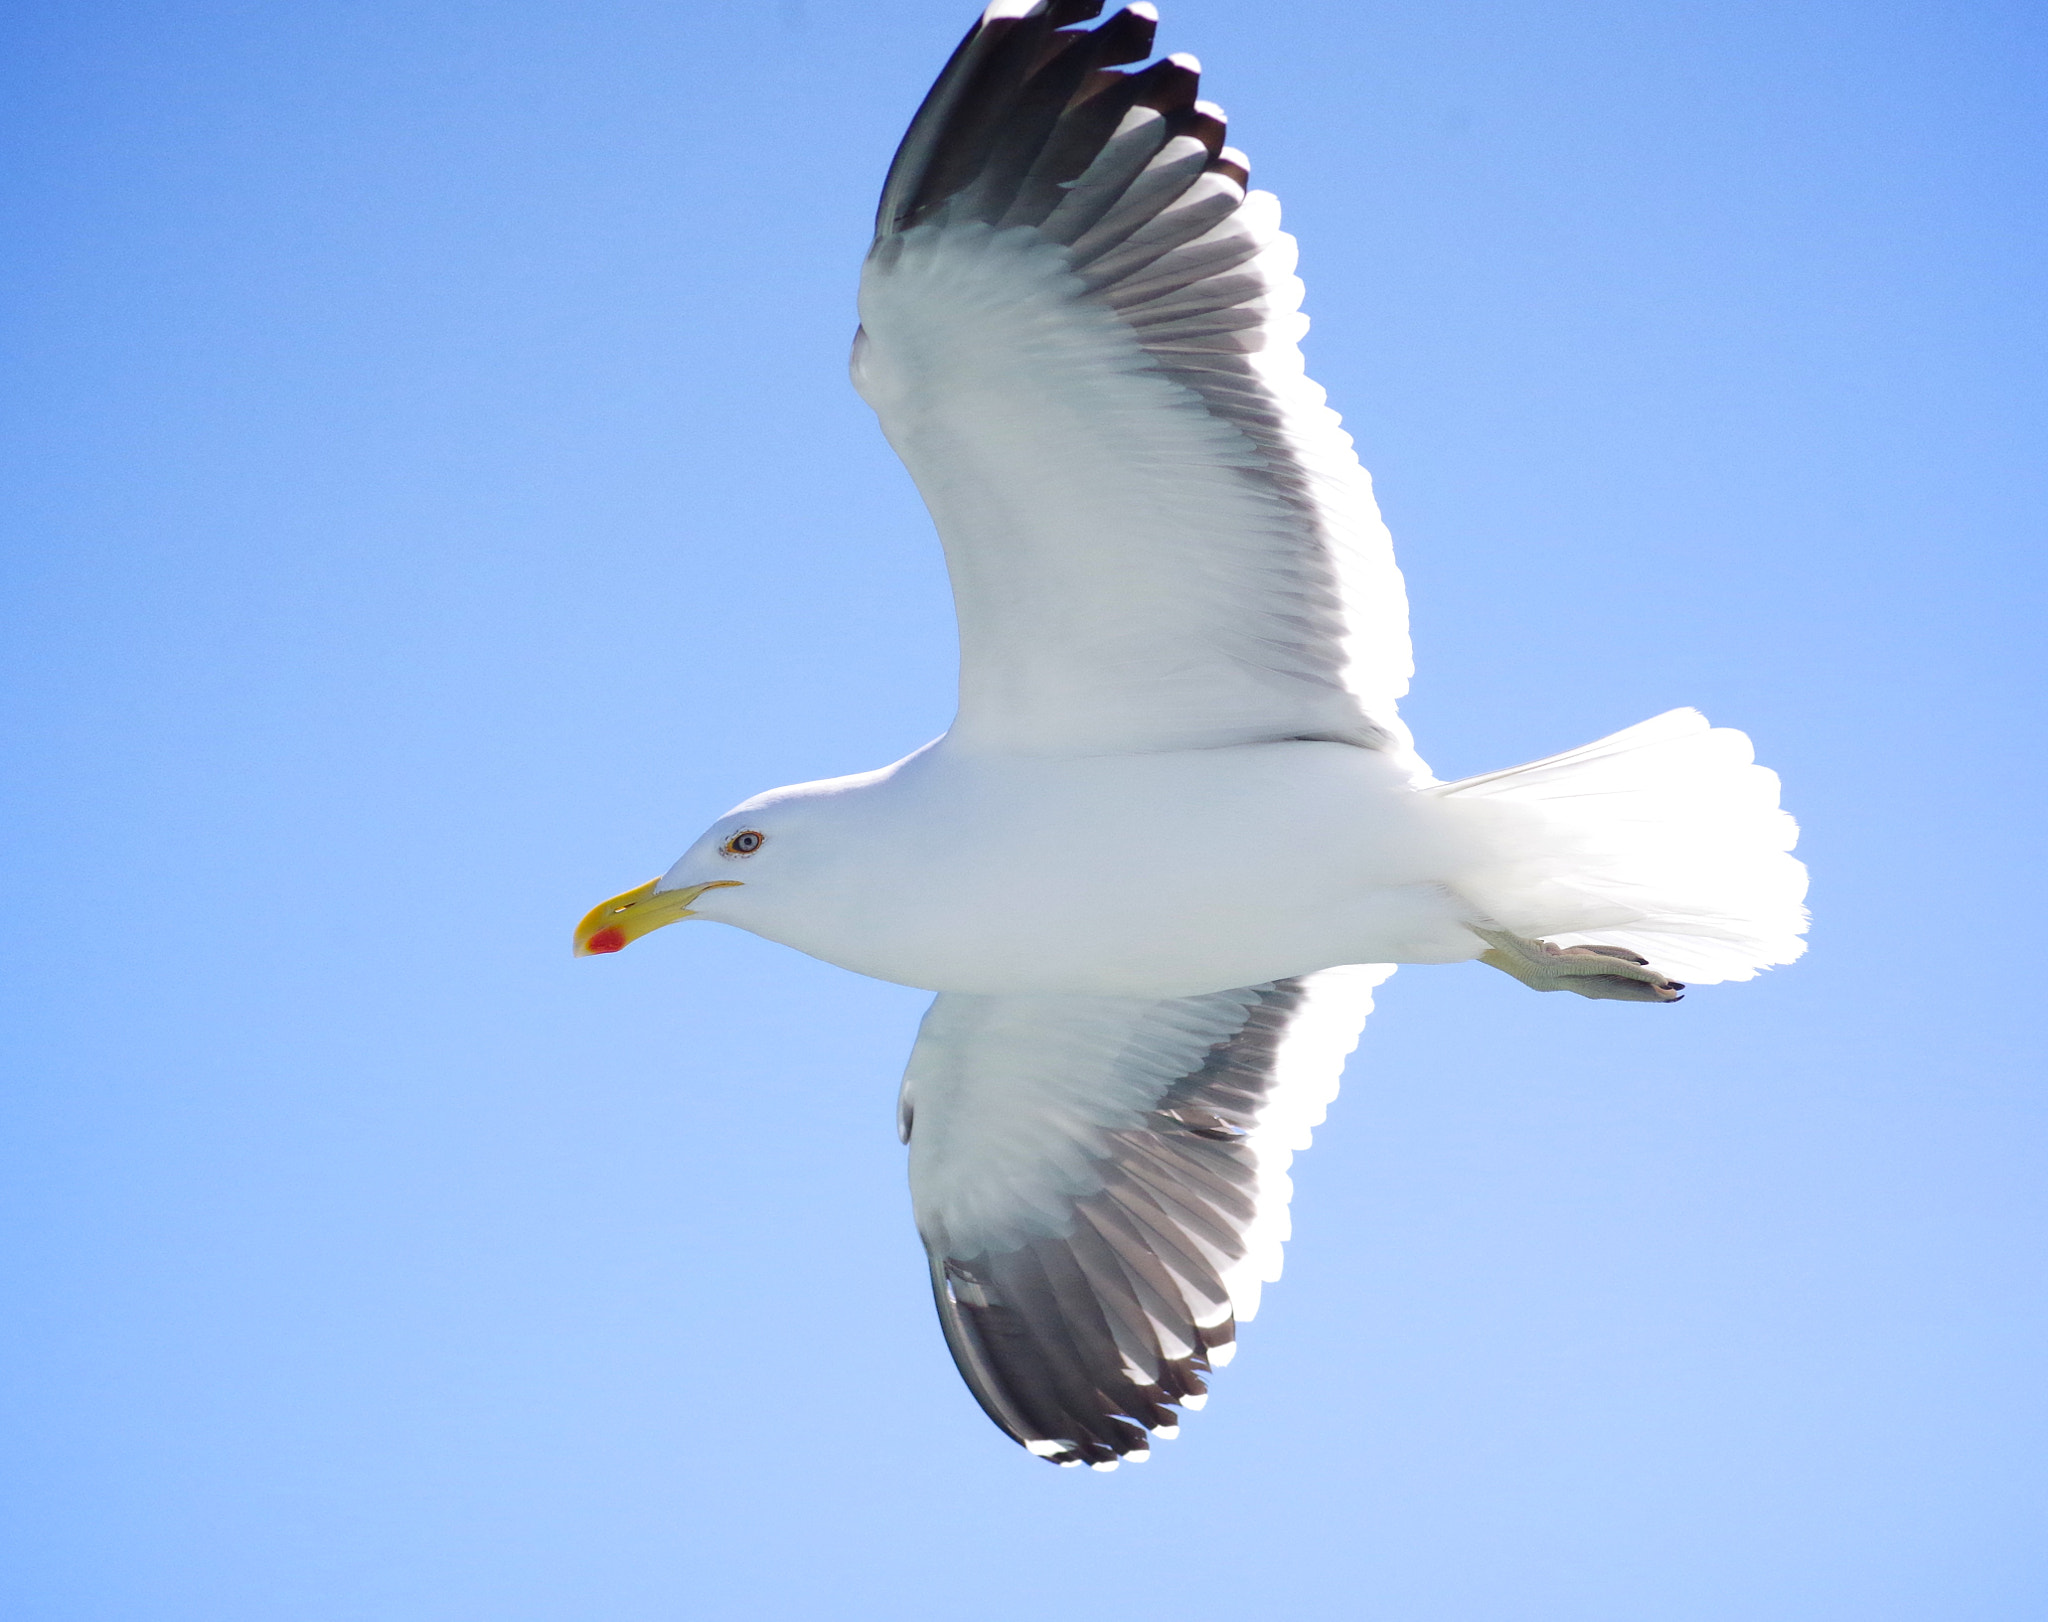 Pentax K-30 + Pentax smc D-FA 100mm F2.8 Macro WR sample photo. Gulls and sharks of gaansbaii, south africa photography